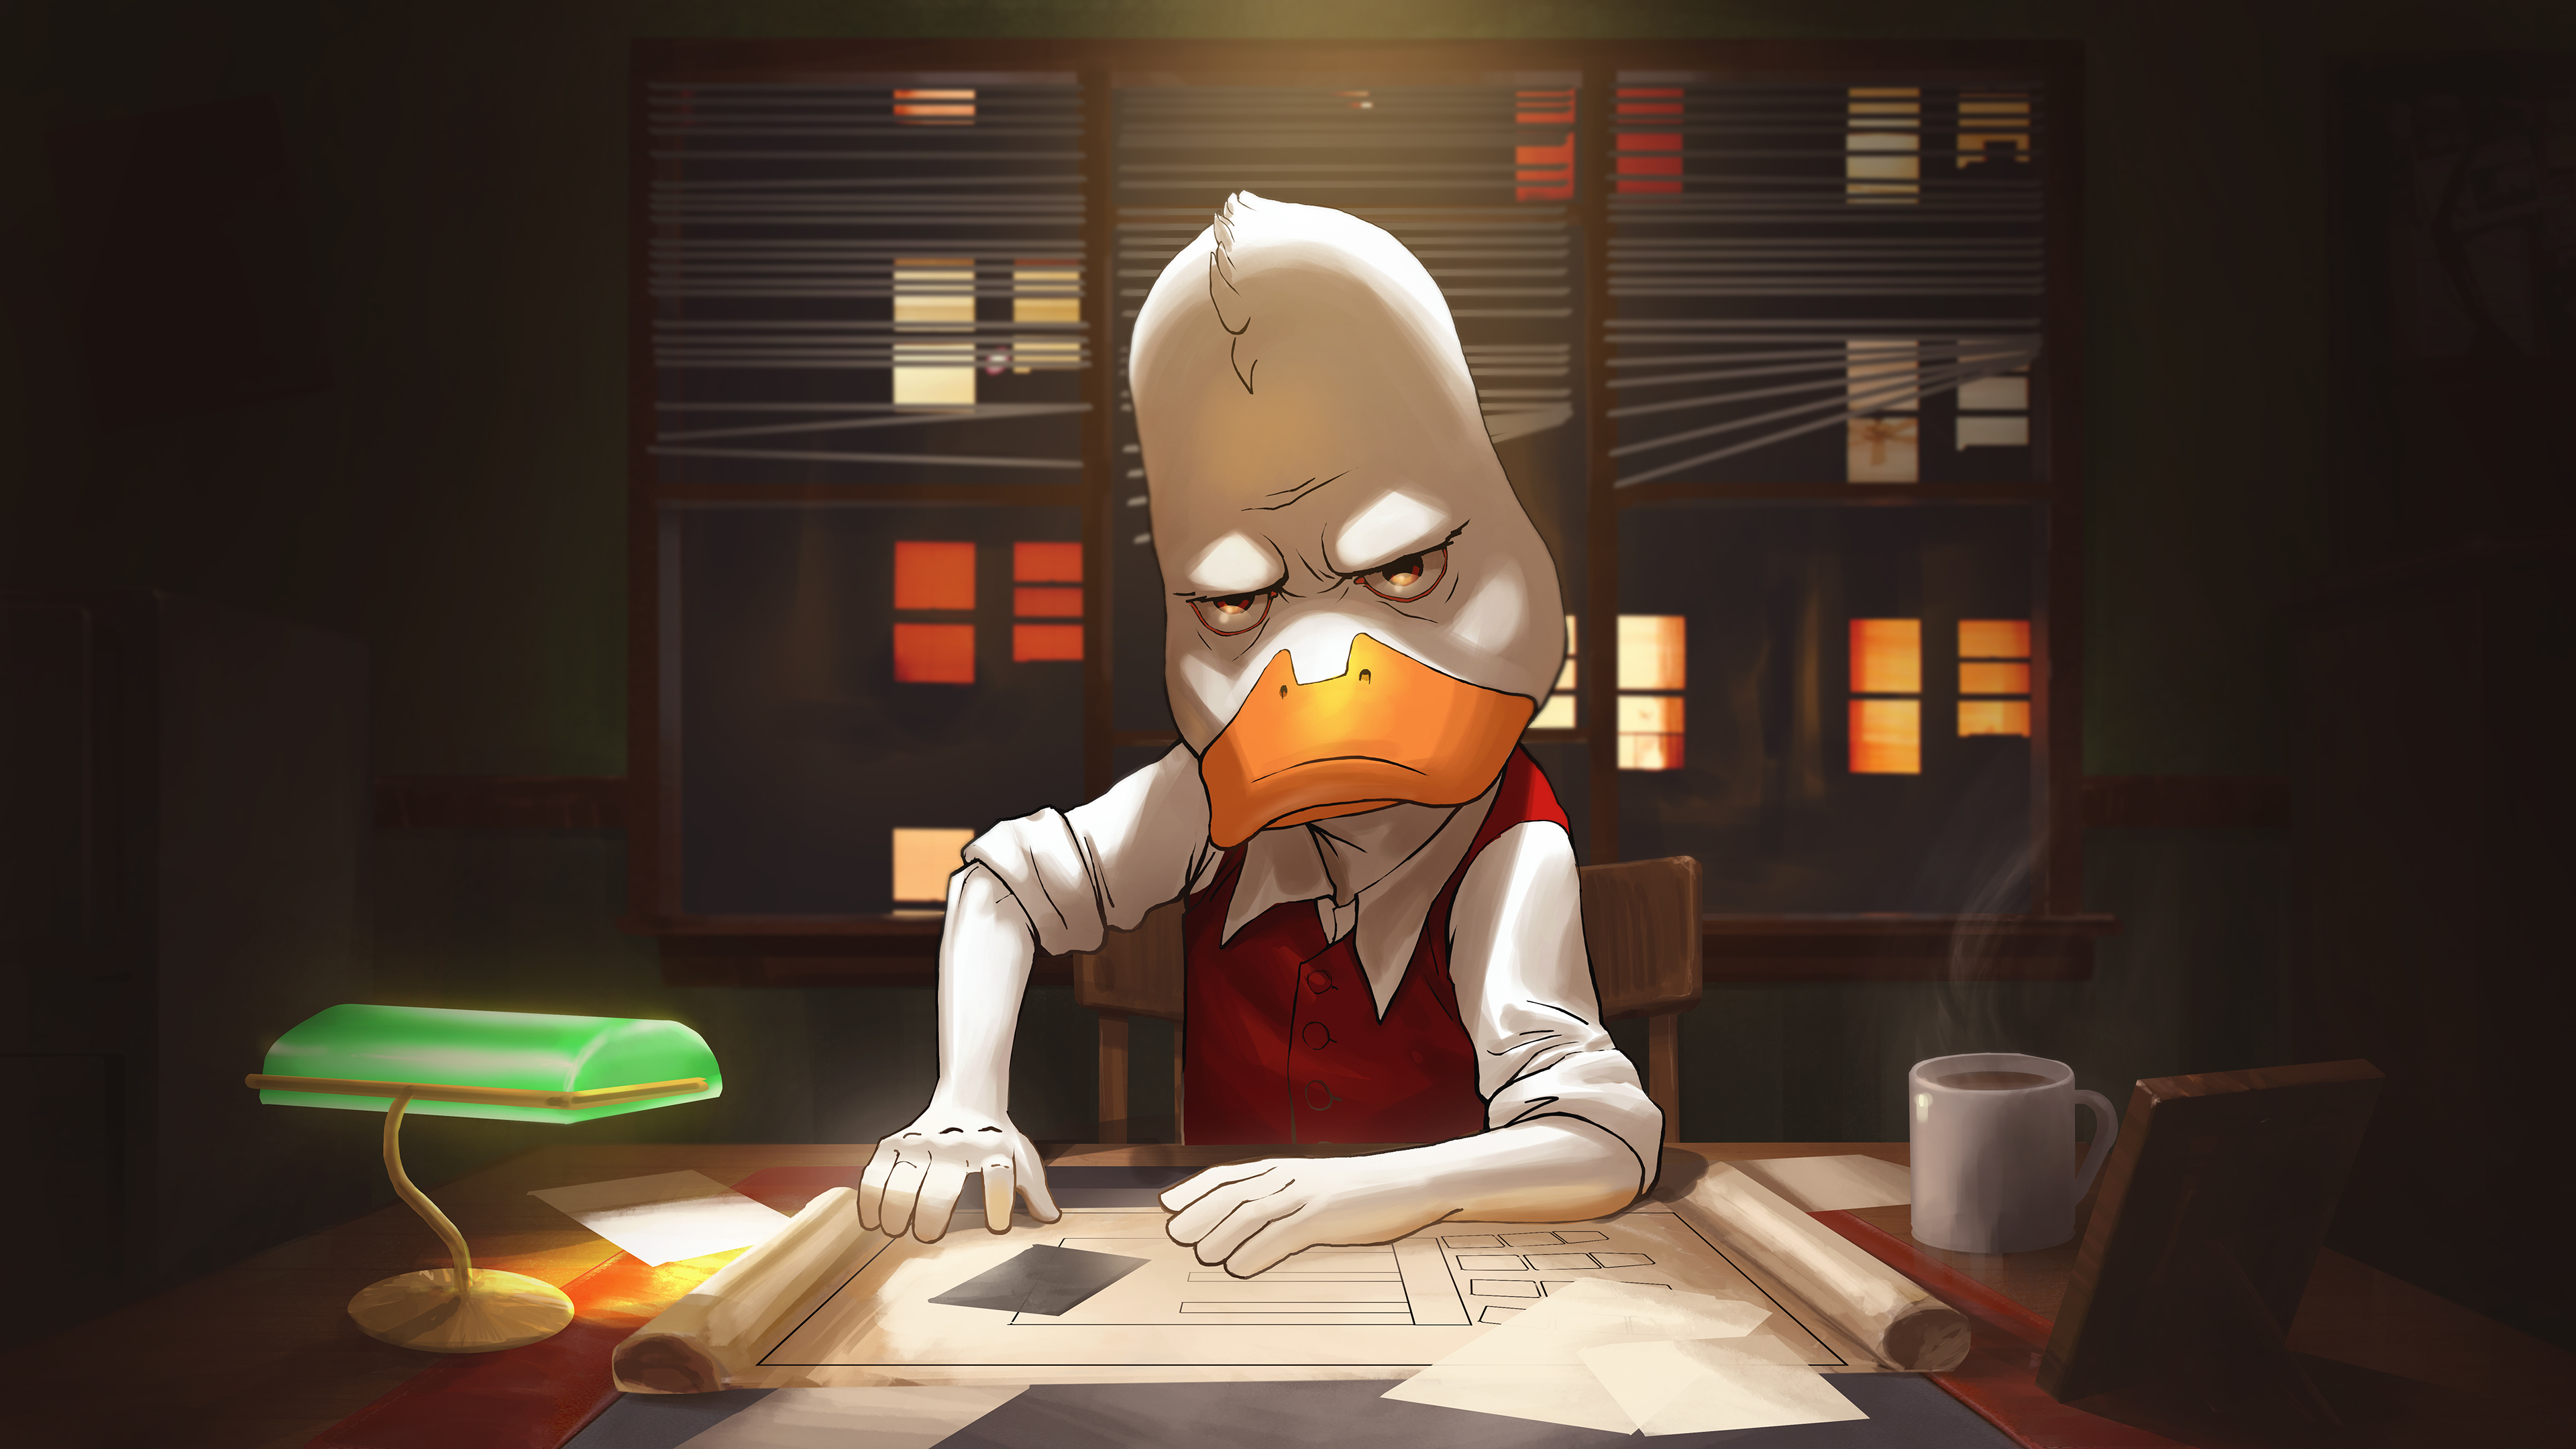 Howard The Duck Contest Of Champions, HD Games, 4k Wallpaper